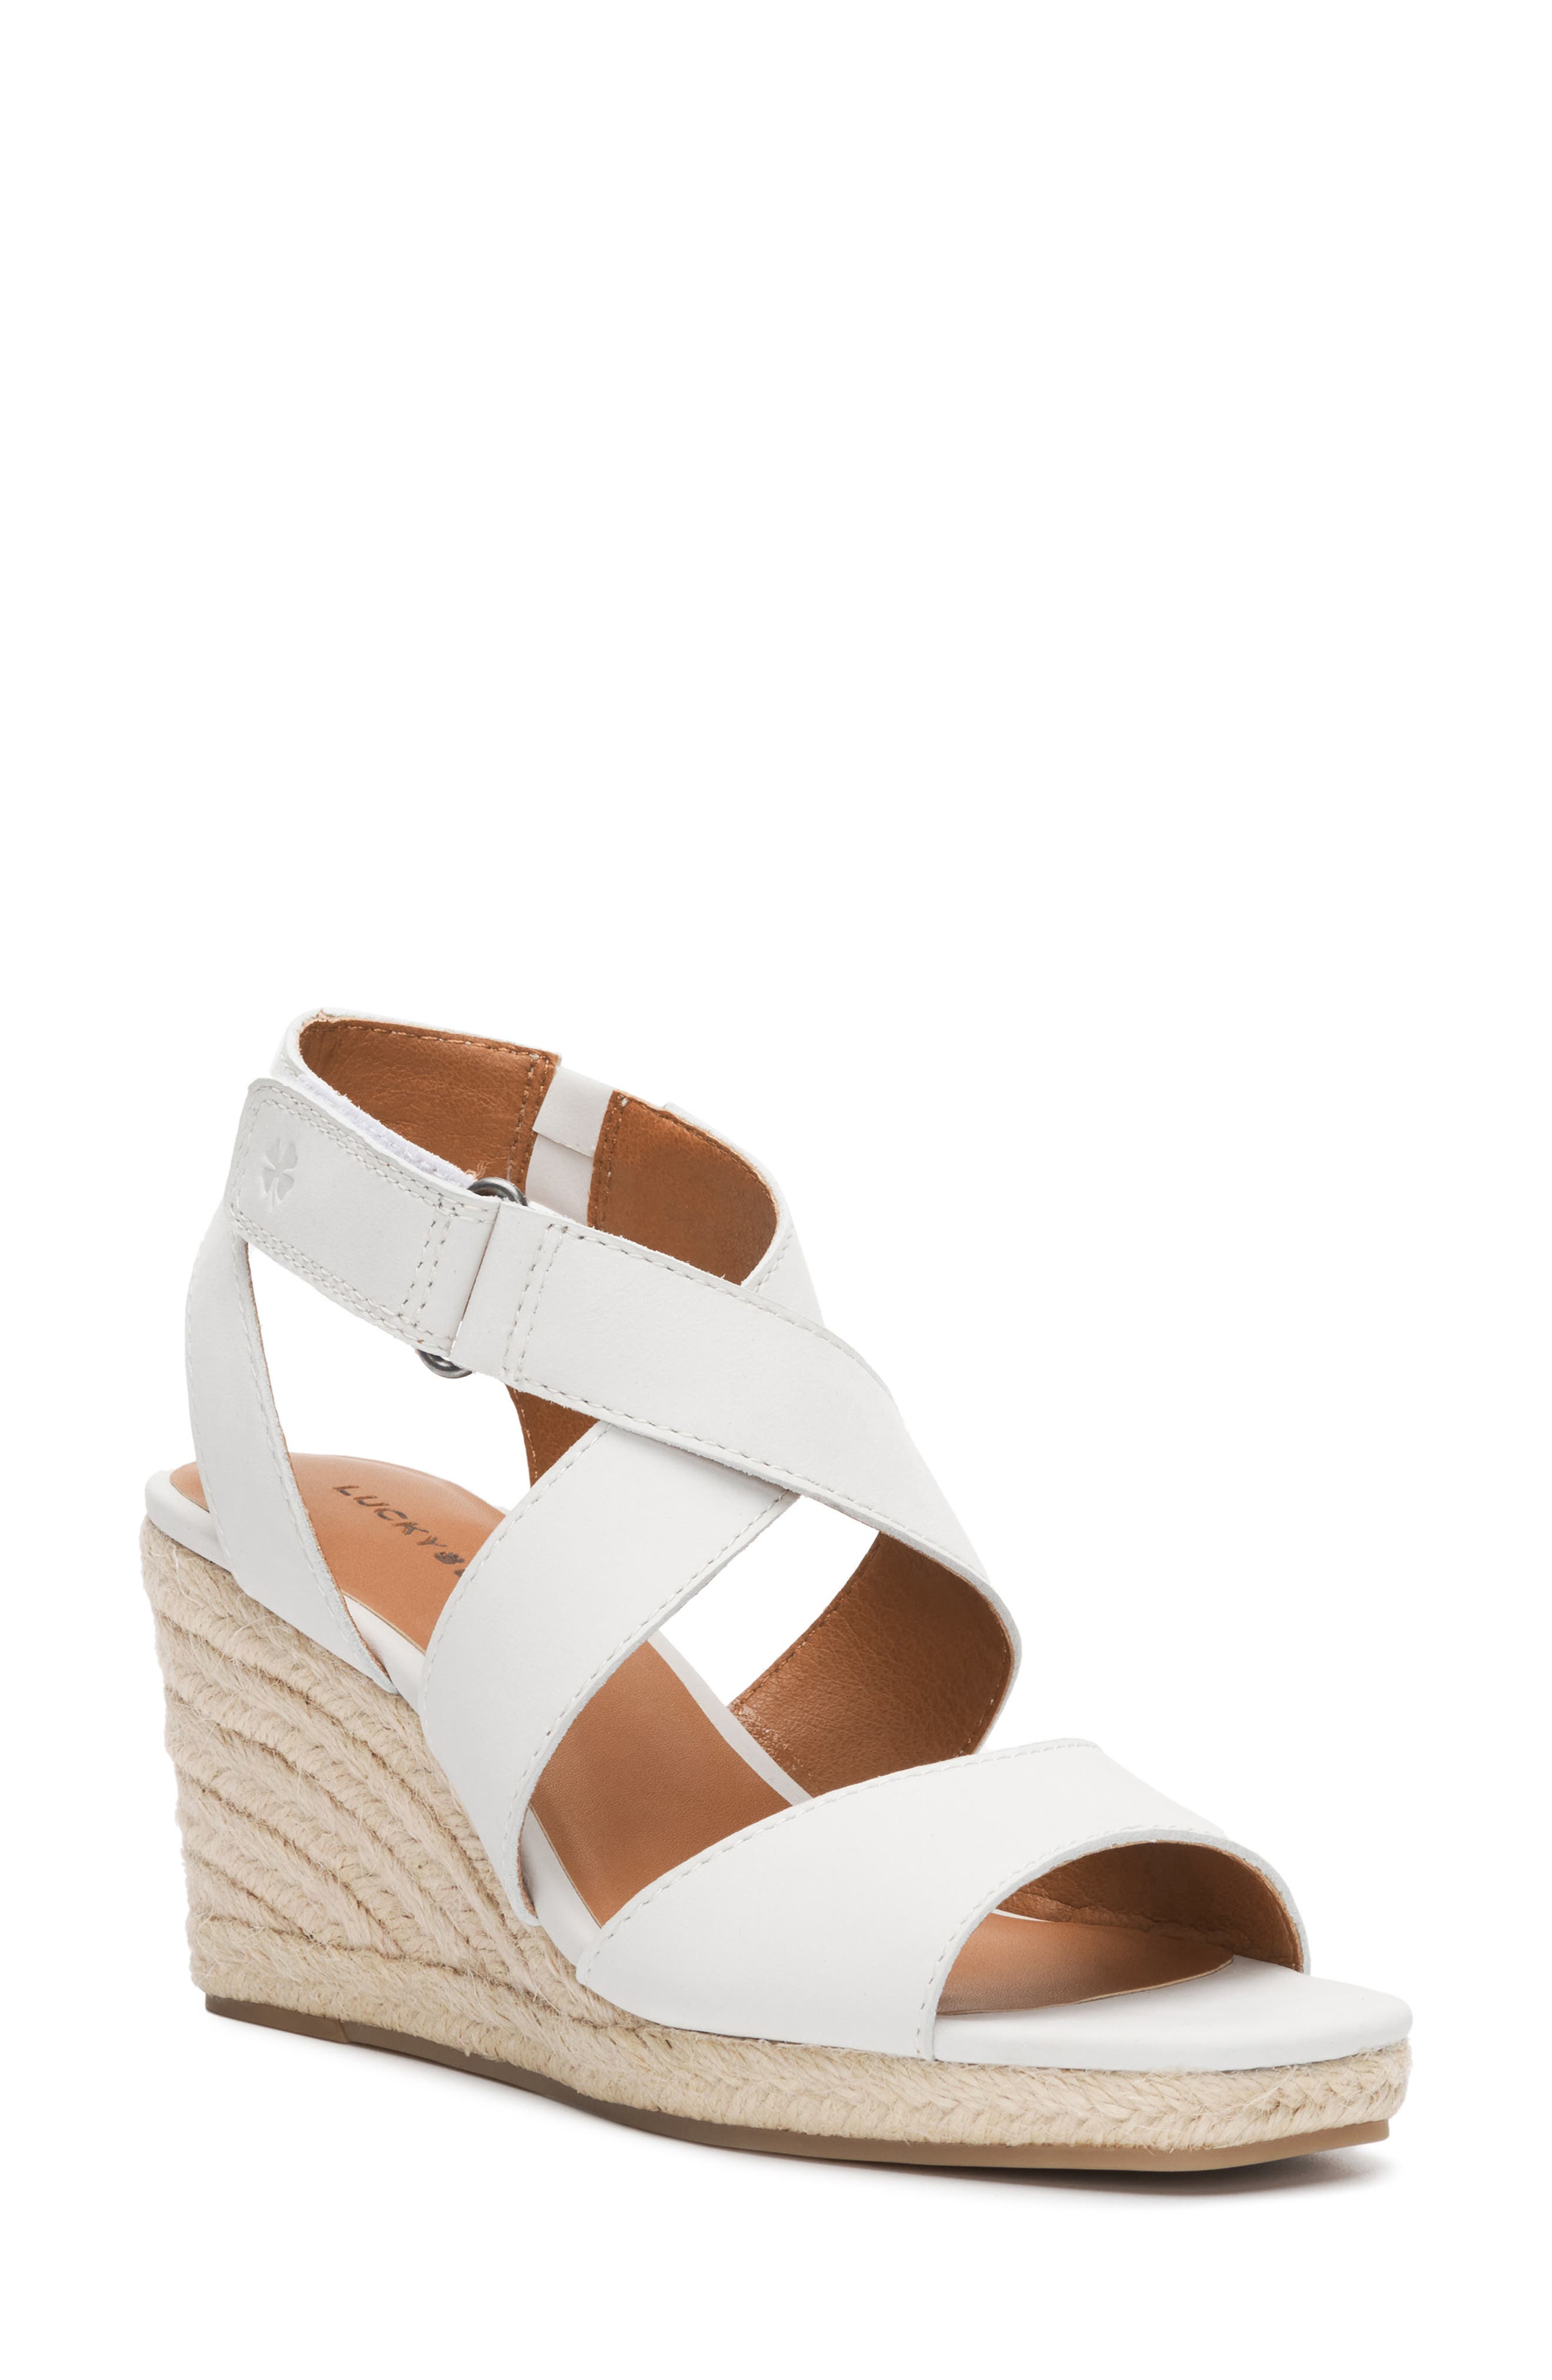 Bernia Espadrille Wedge in White Leather at Nordstrom Nordstrom Women Shoes High Heels Wedges Wedge Sandals 